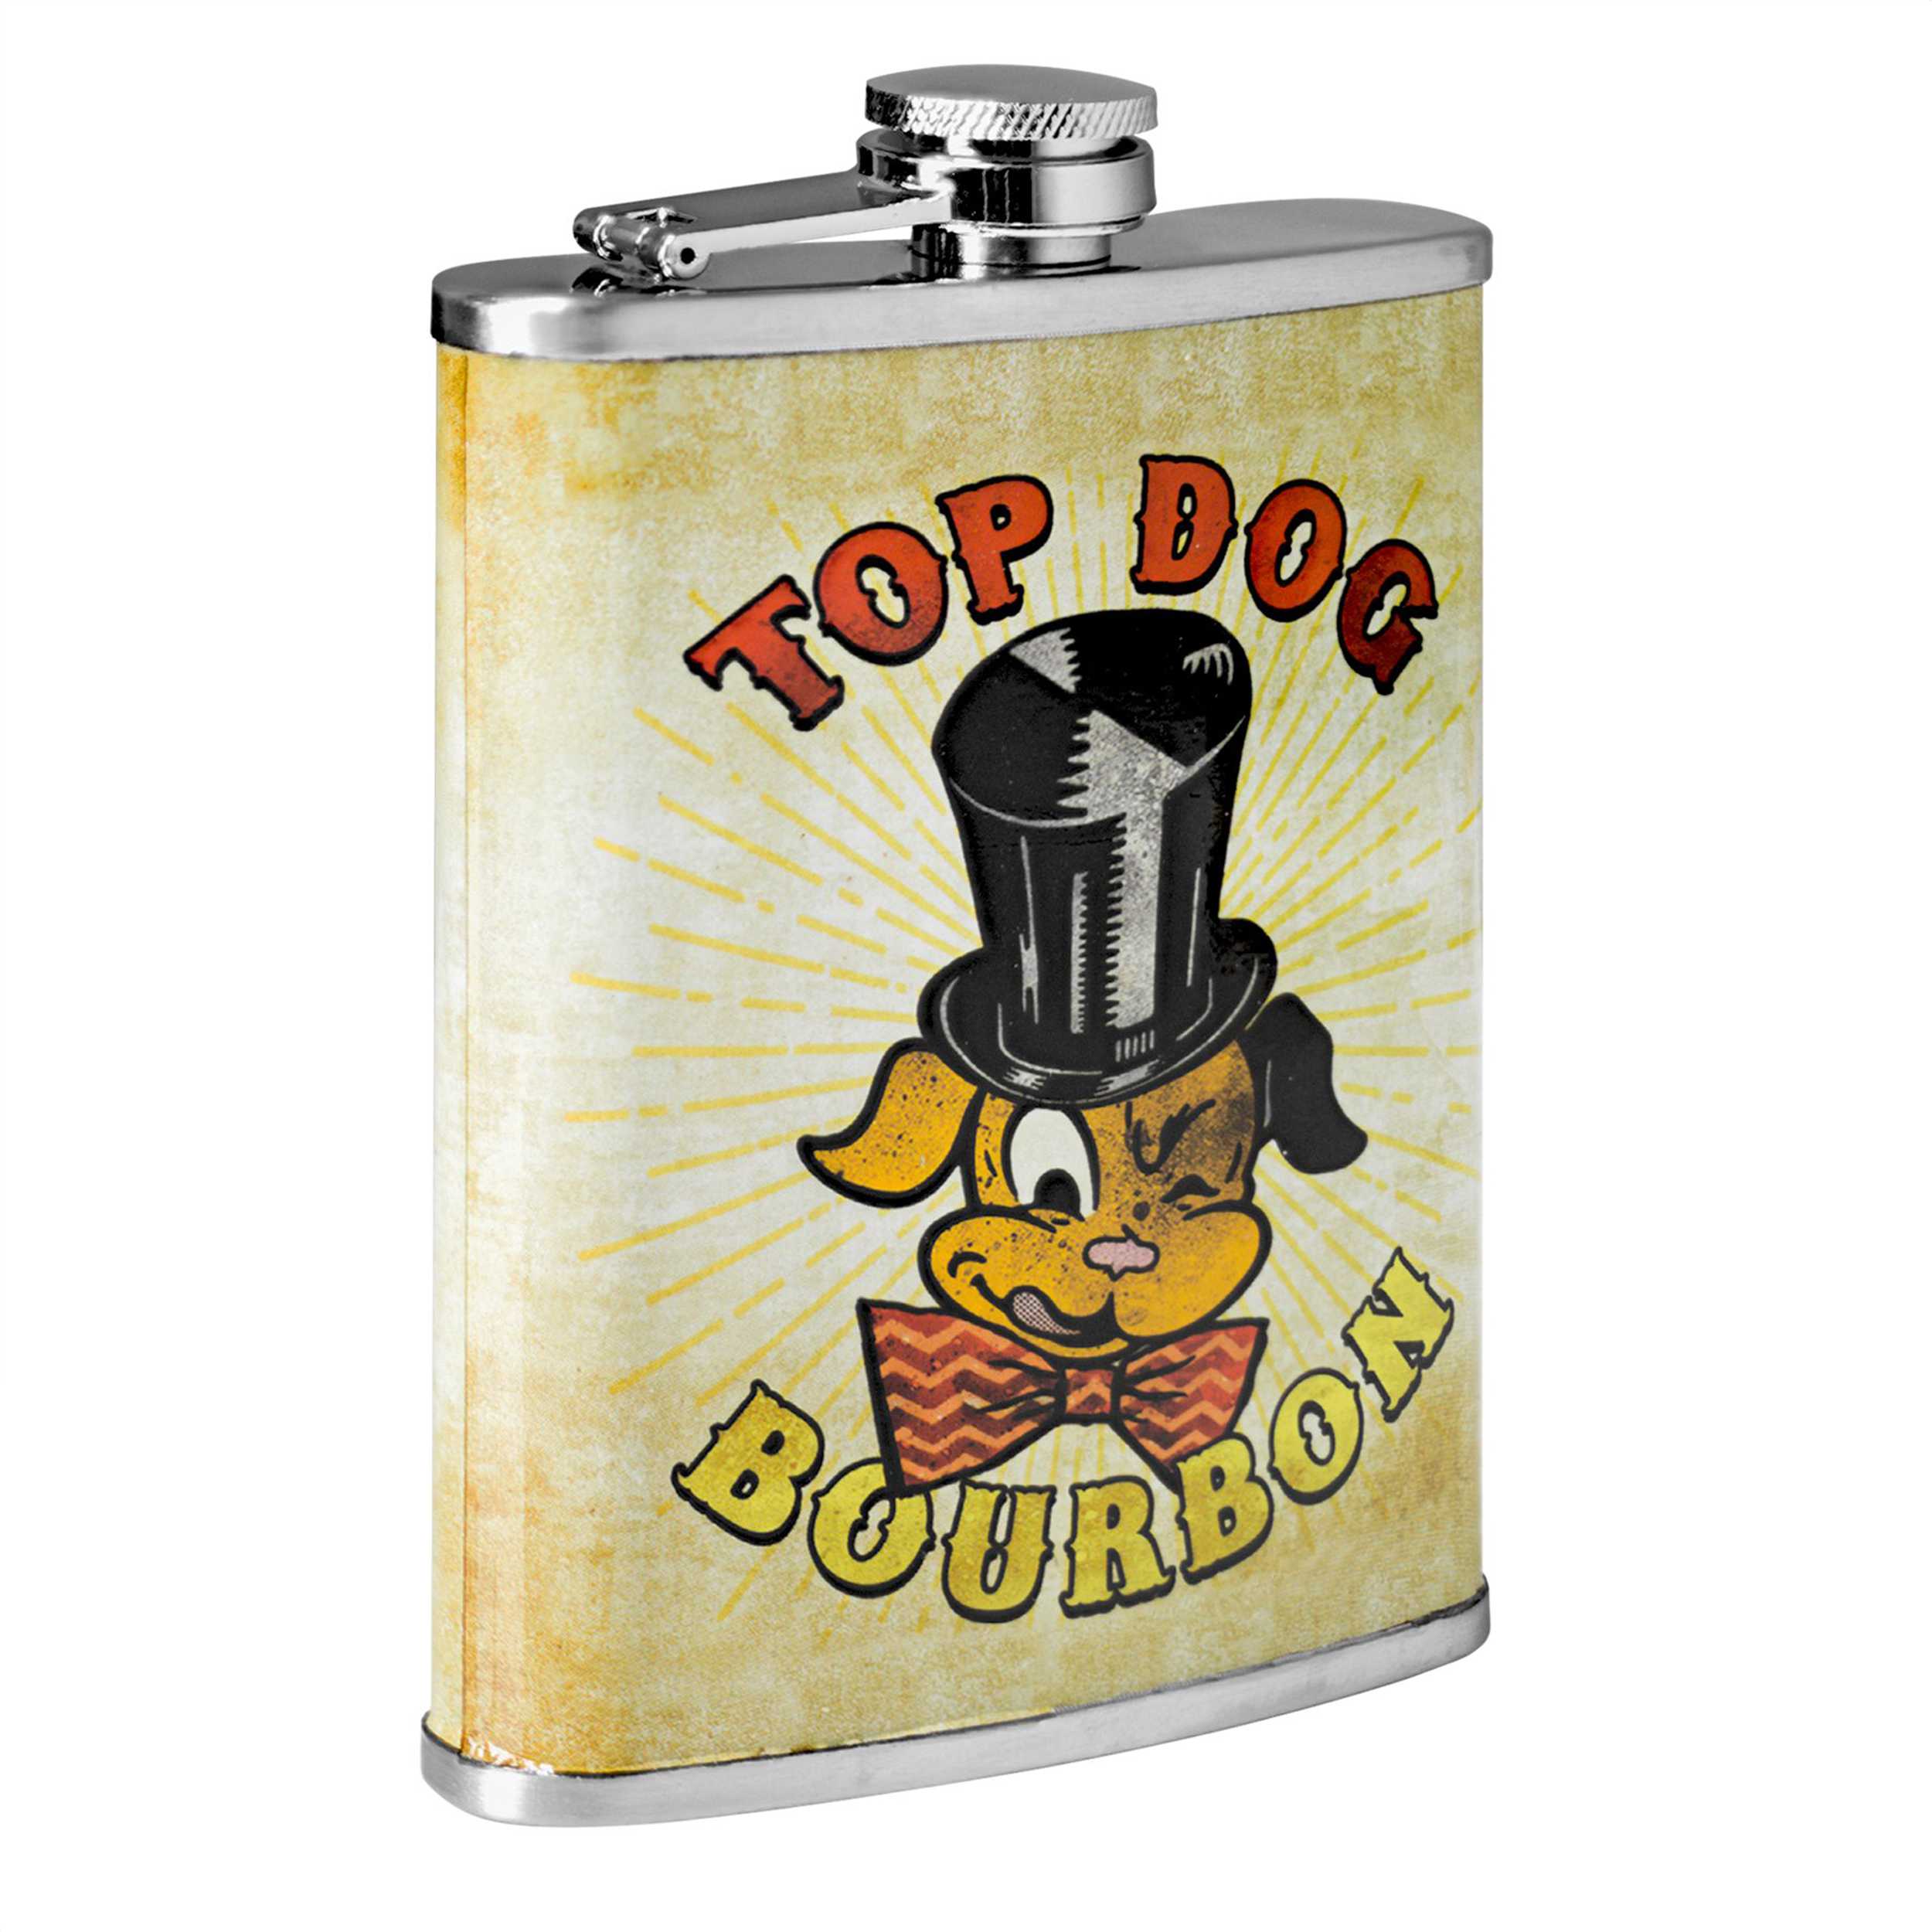 Stainless Steel Flask 8oz - Top Dog Bourbon